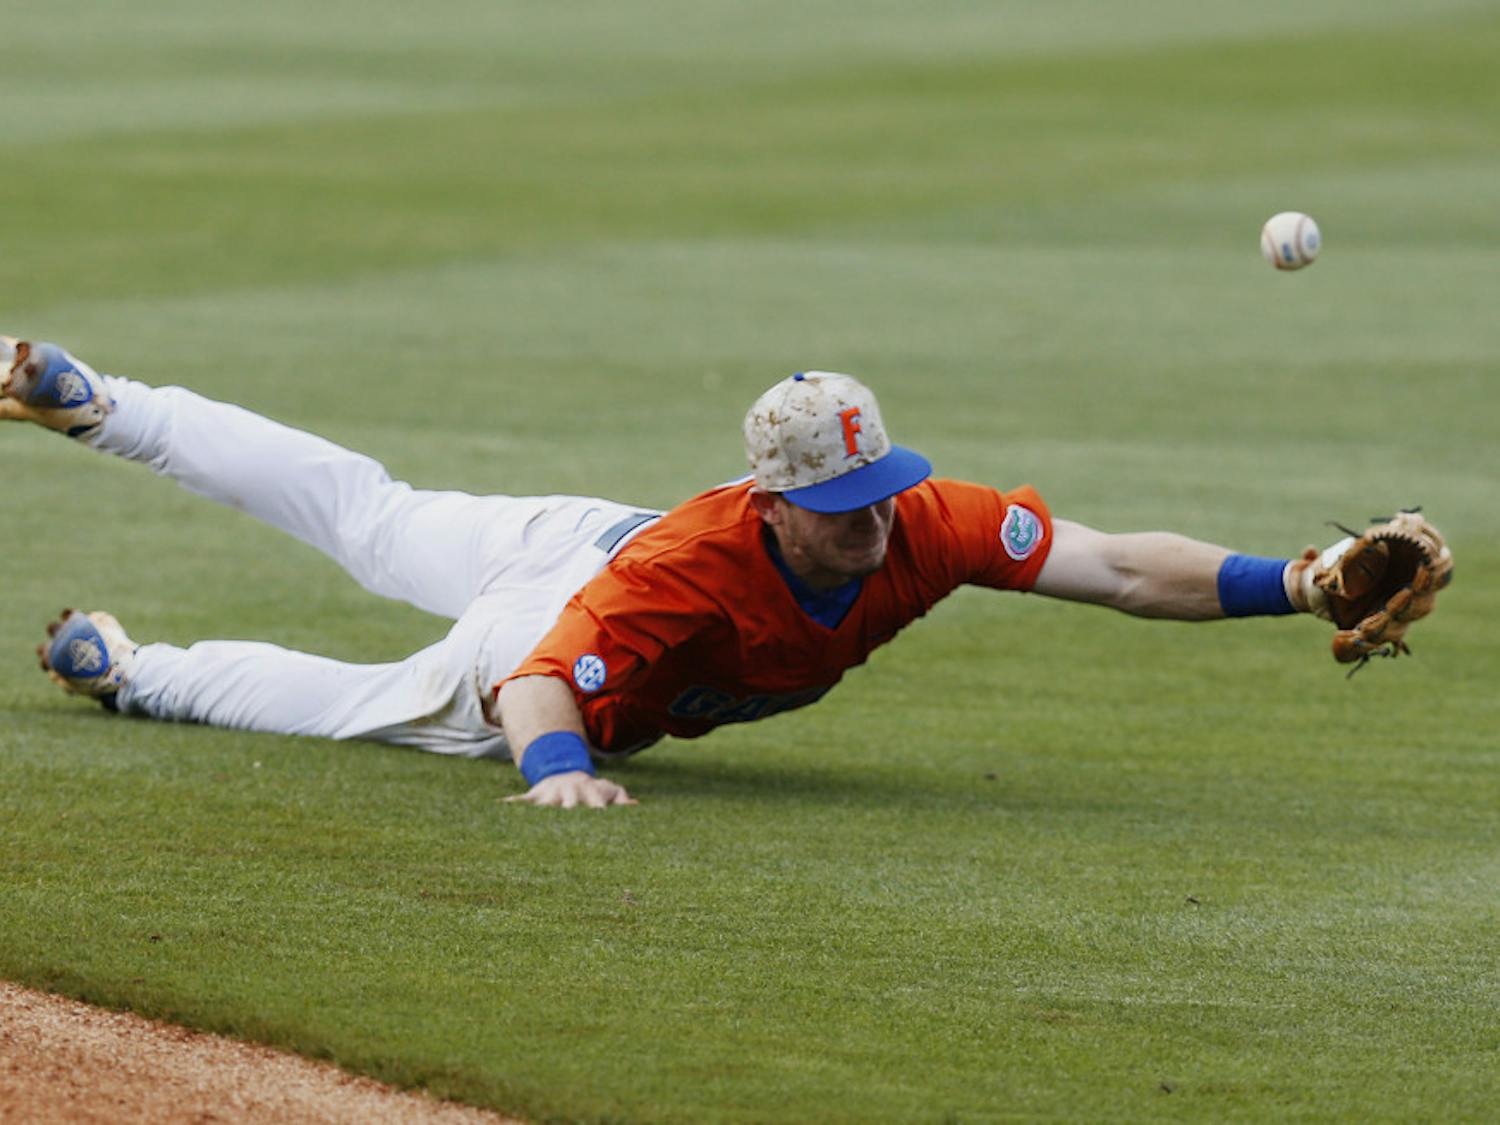 Florida's Deacon Liput dives for the ball and misses it in the seventh inning against Texas A&amp;M in a Southeastern Conference NCAA college baseball championship game at the Hoover Met, Sunday, May 29, 2016, in Hoover, Ala. Texas A&amp;M won 12-5. (AP Photo/Brynn Anderson)